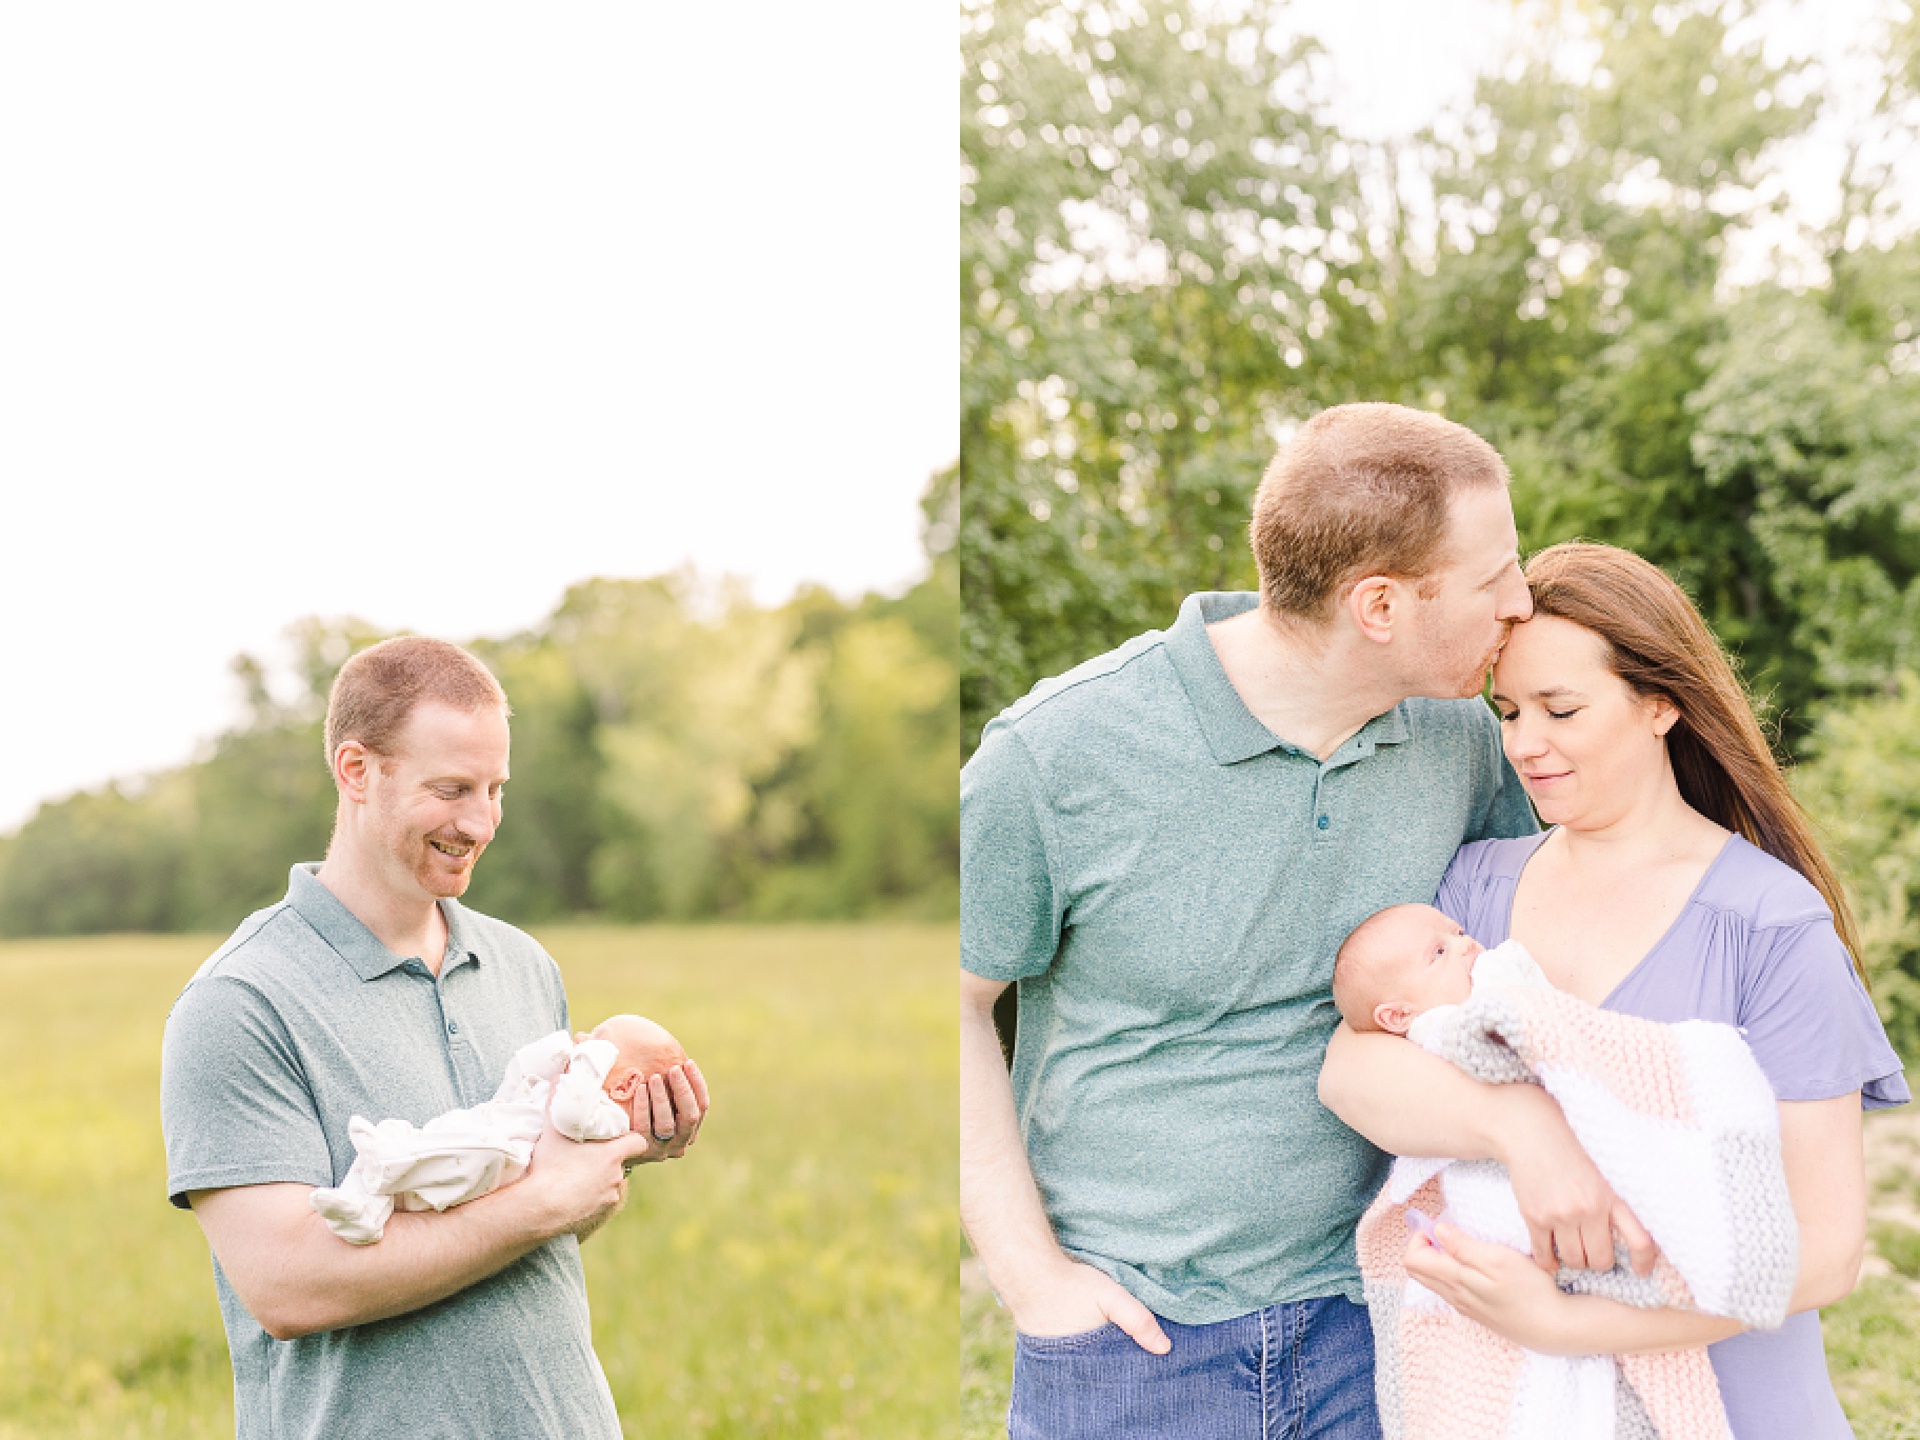 dad holds baby and kisses wife on the forehead during outdoor newborn photo session with Sara Sniderman Photography at Heard Farm Wayland Massachusetts